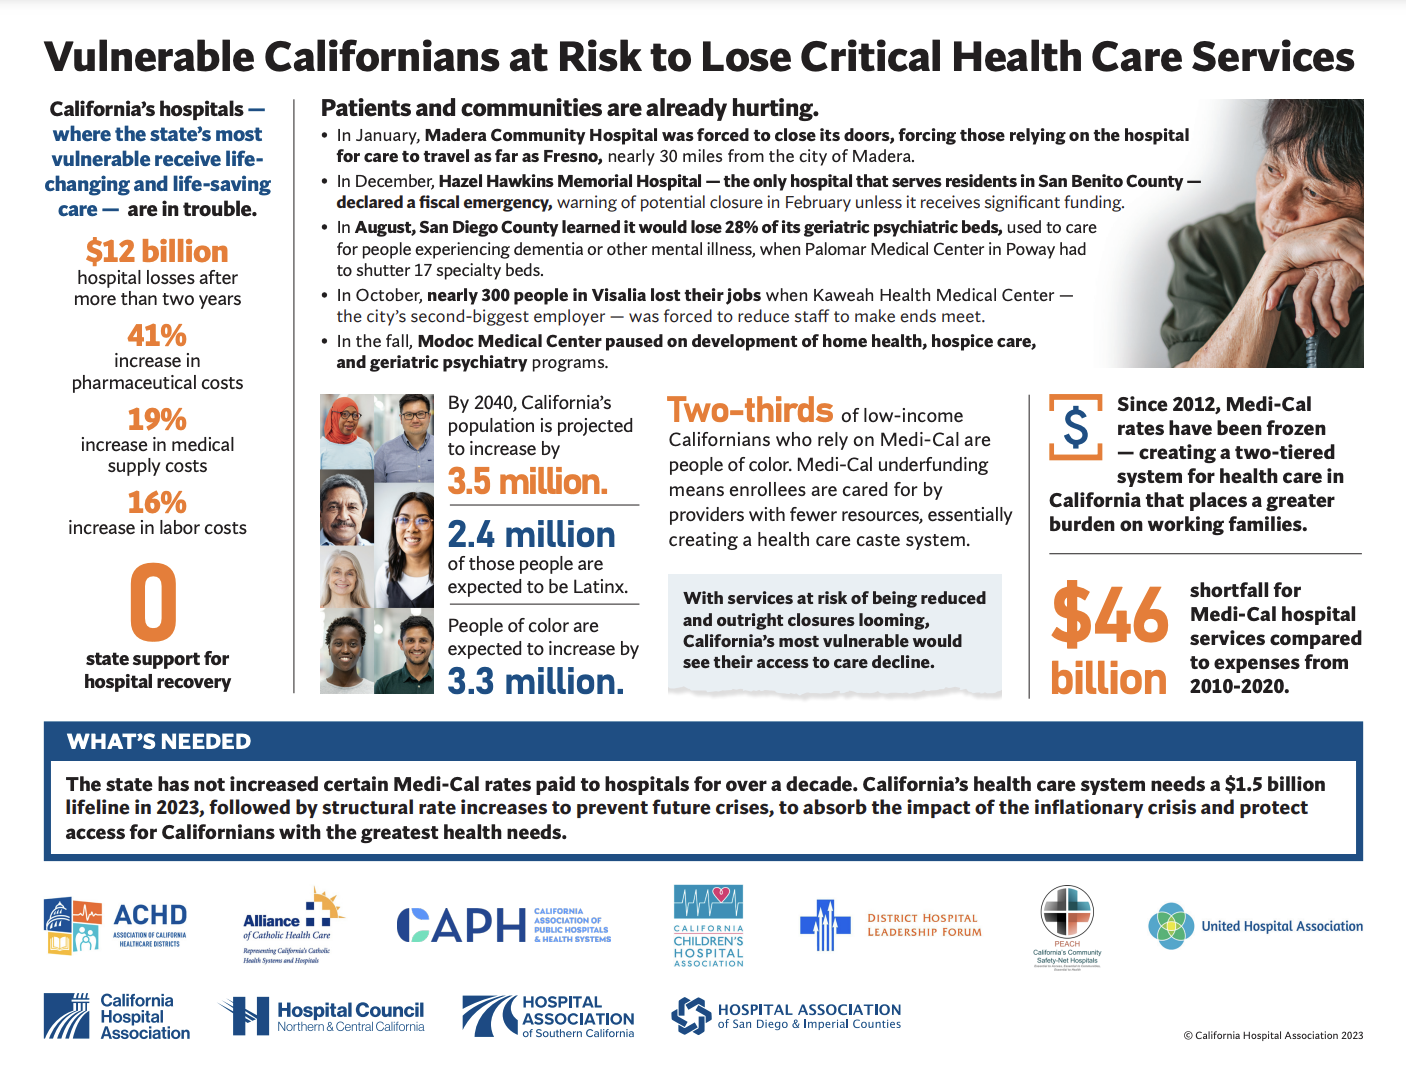 Inforgraphic for Vulnerable Californians at Risk to Lose Critical Health Care Services - 2023